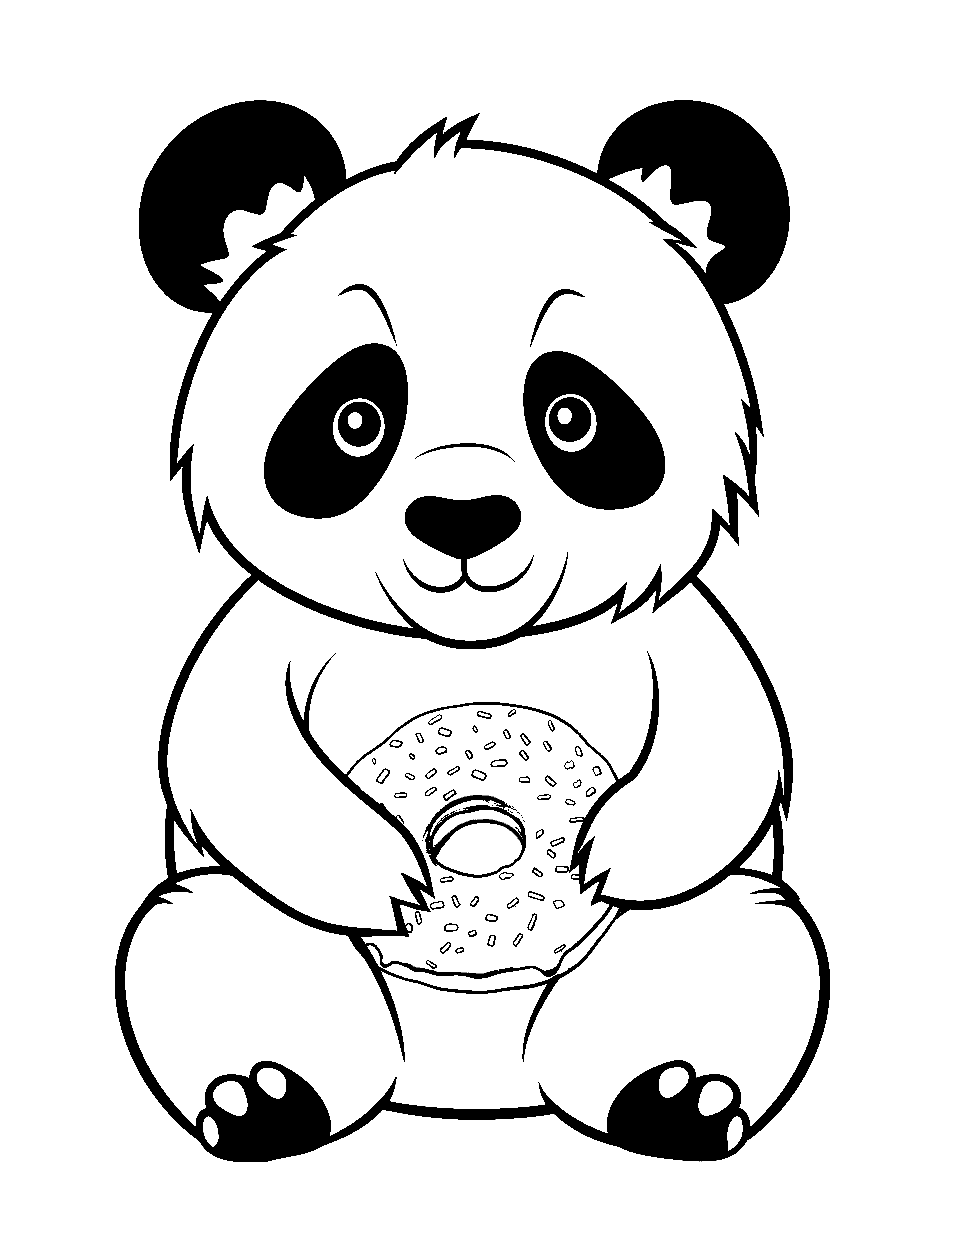 Panda Eating a Doughnut Donut Coloring Page - A cute panda holding and eating a delicious doughnut.